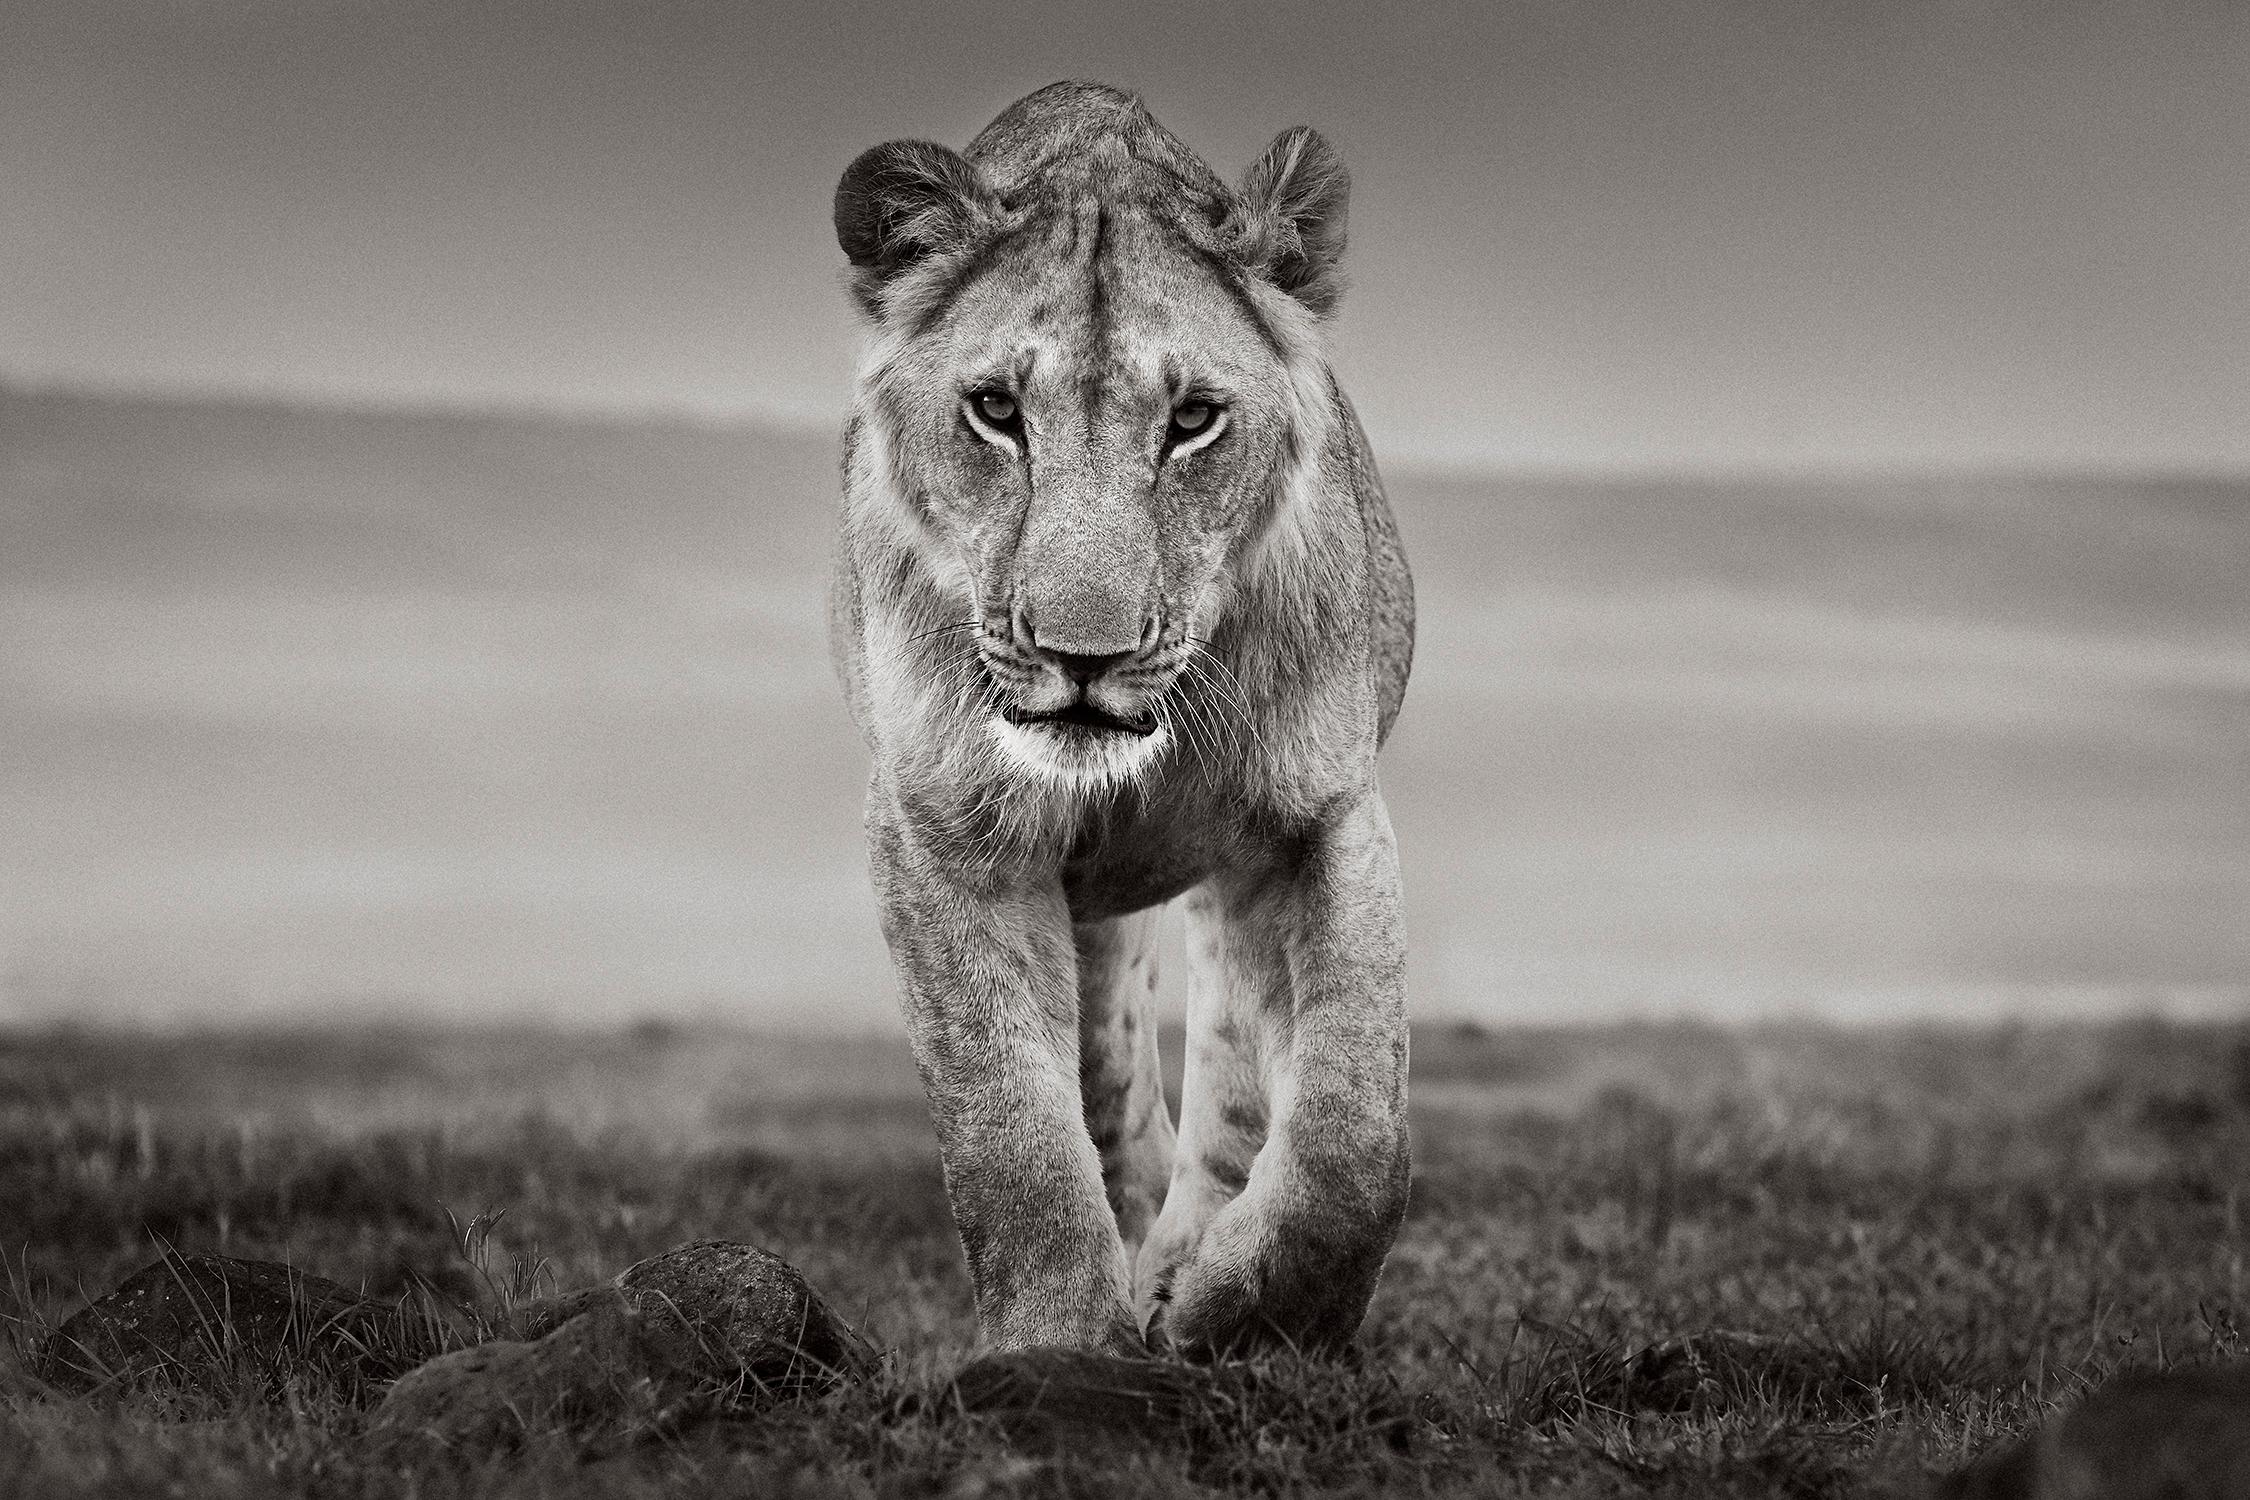 Drew Doggett Black and White Photograph - Intimate, Minimal Portrait of a Lion in Kenya